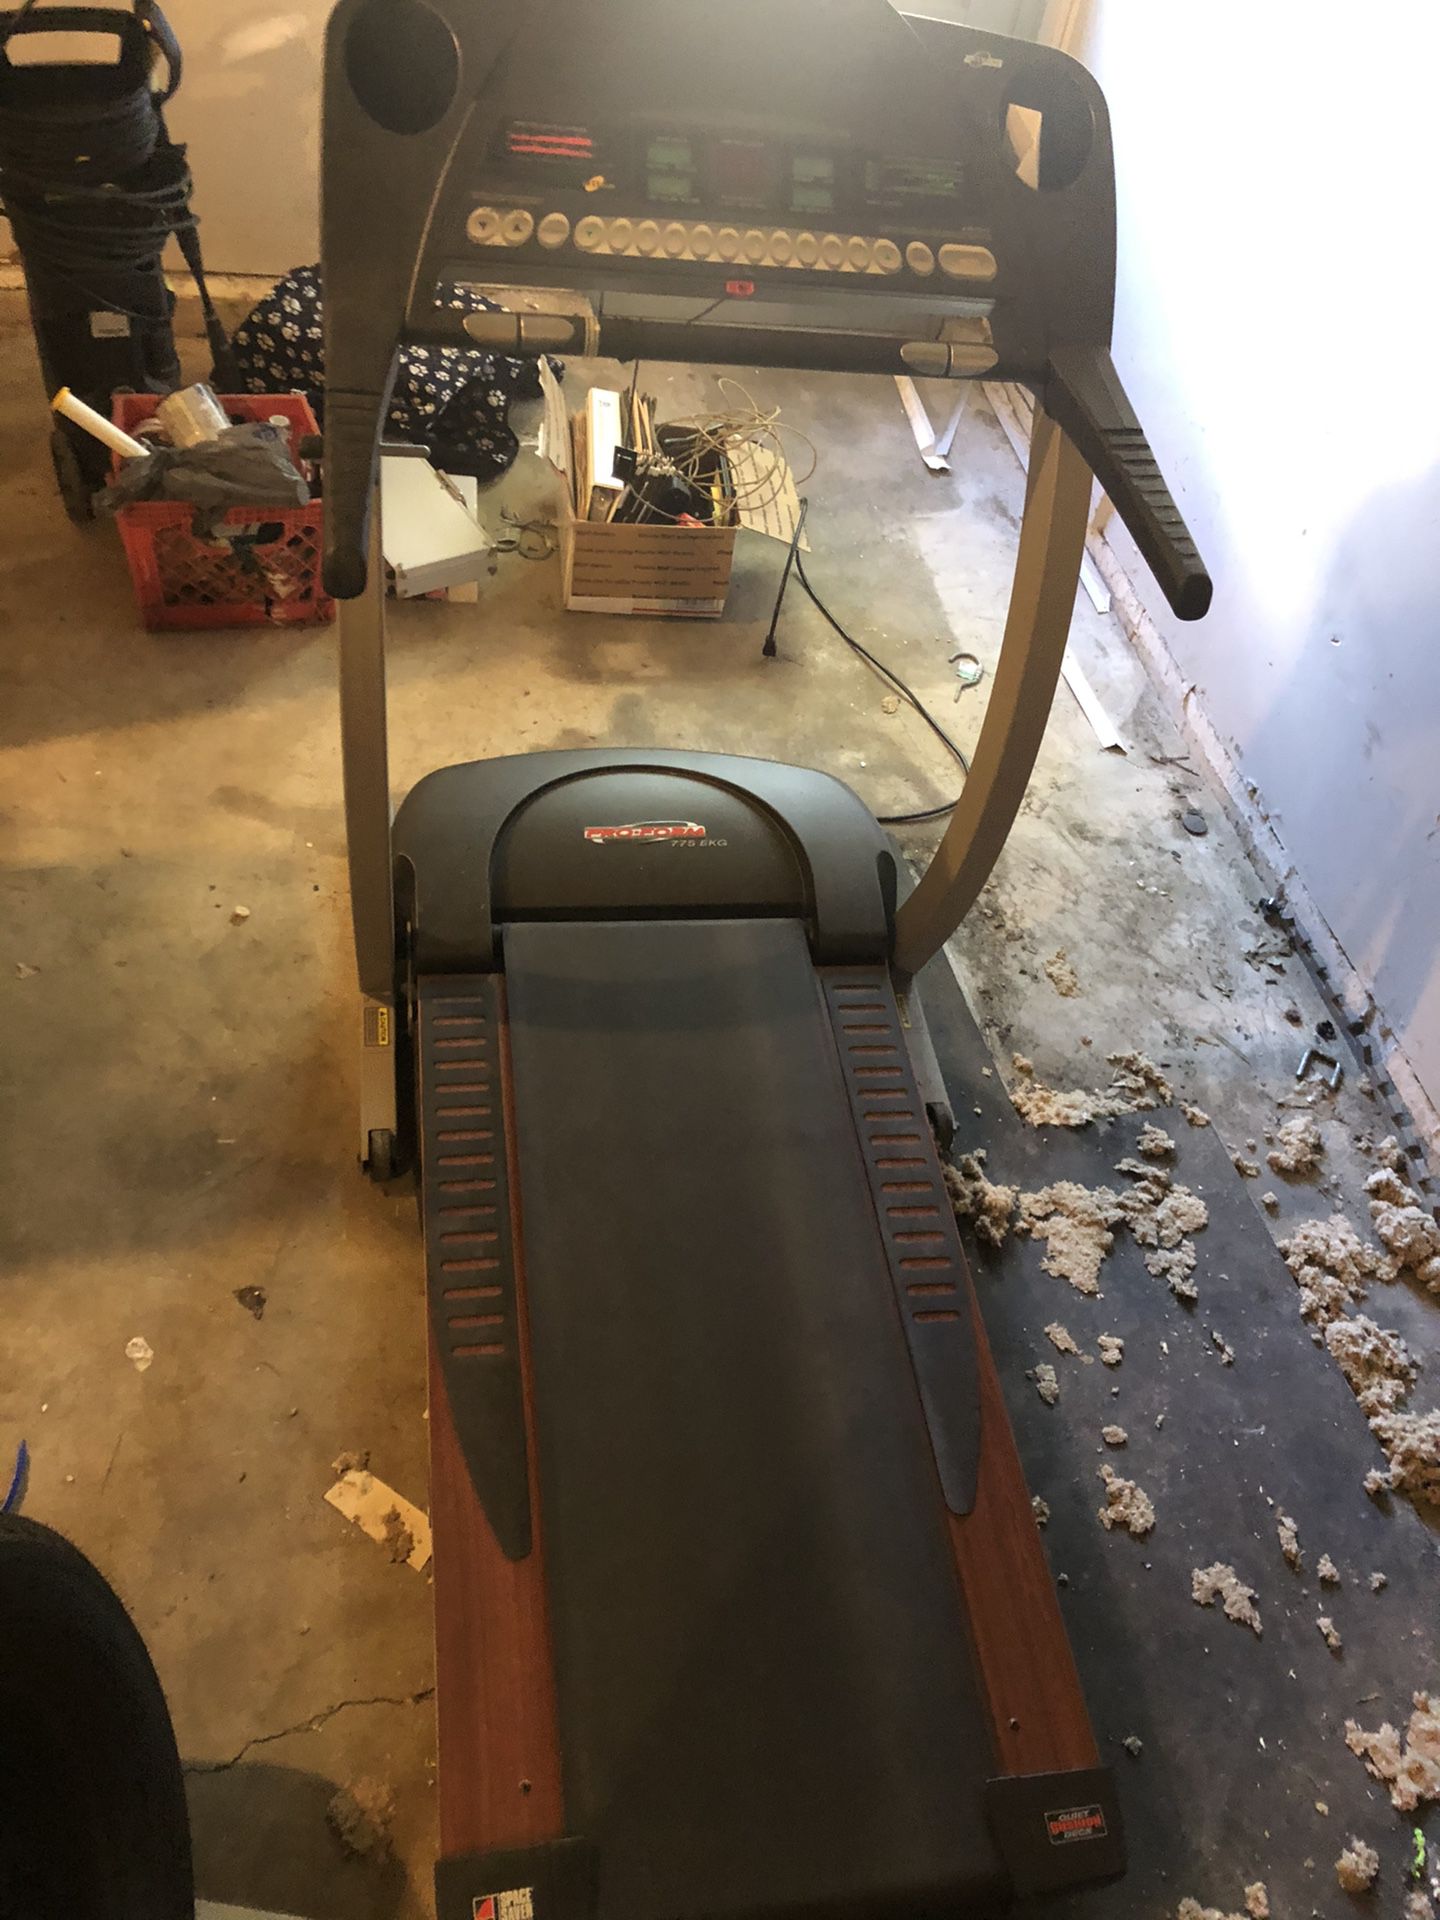 Treadmill works great well made